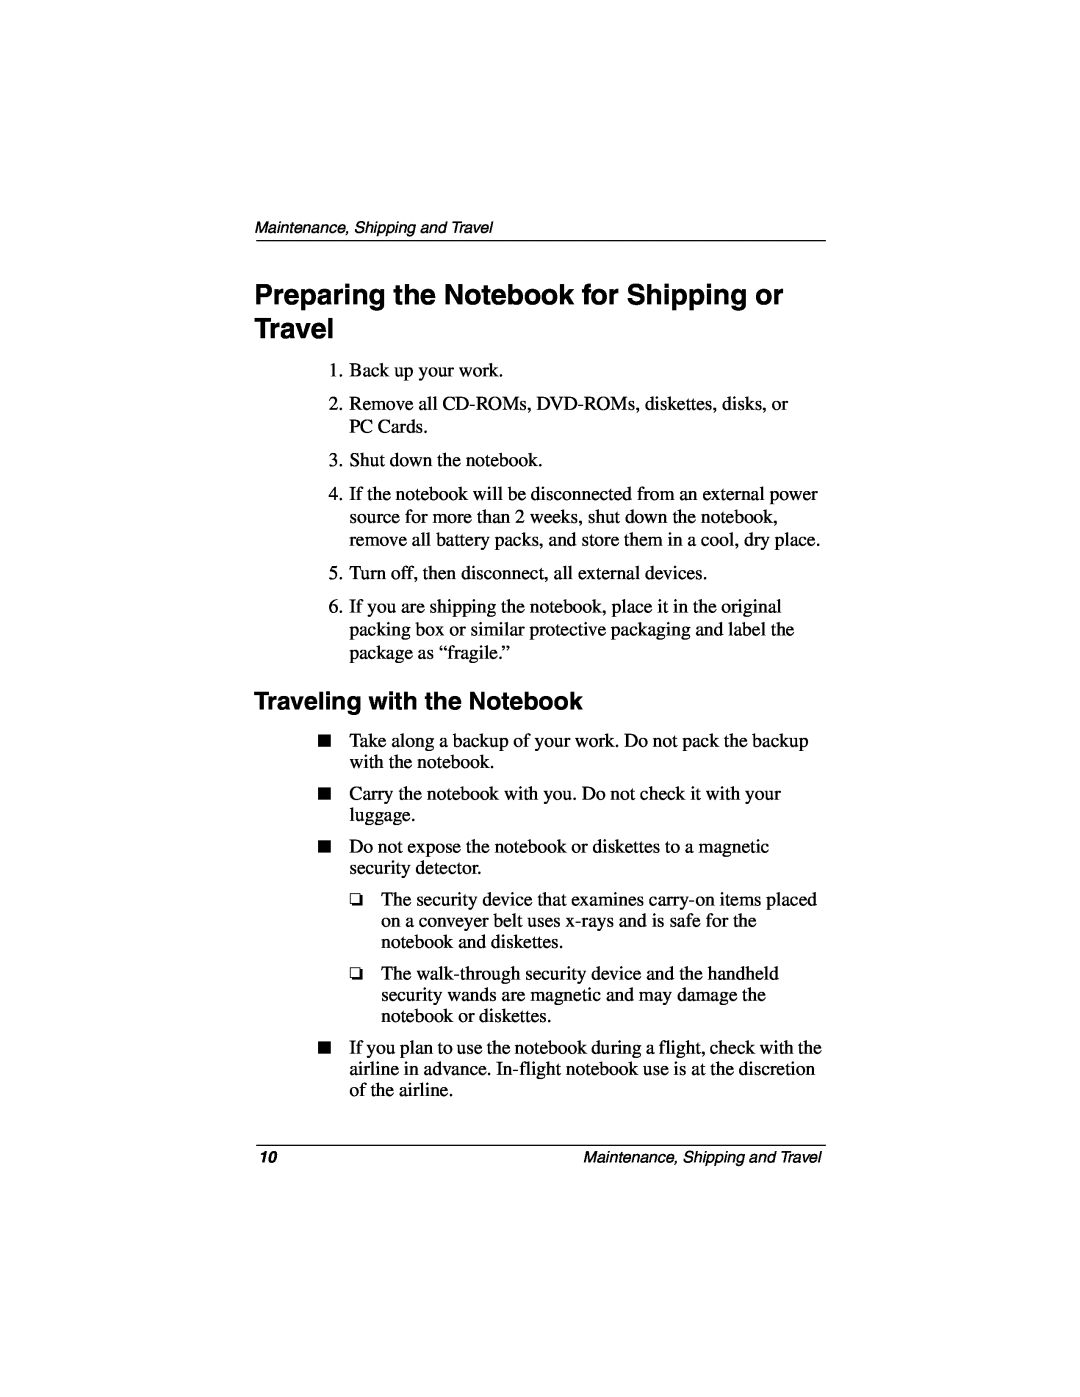 Compaq 267637-001 manual Preparing the Notebook for Shipping or Travel, Traveling with the Notebook 